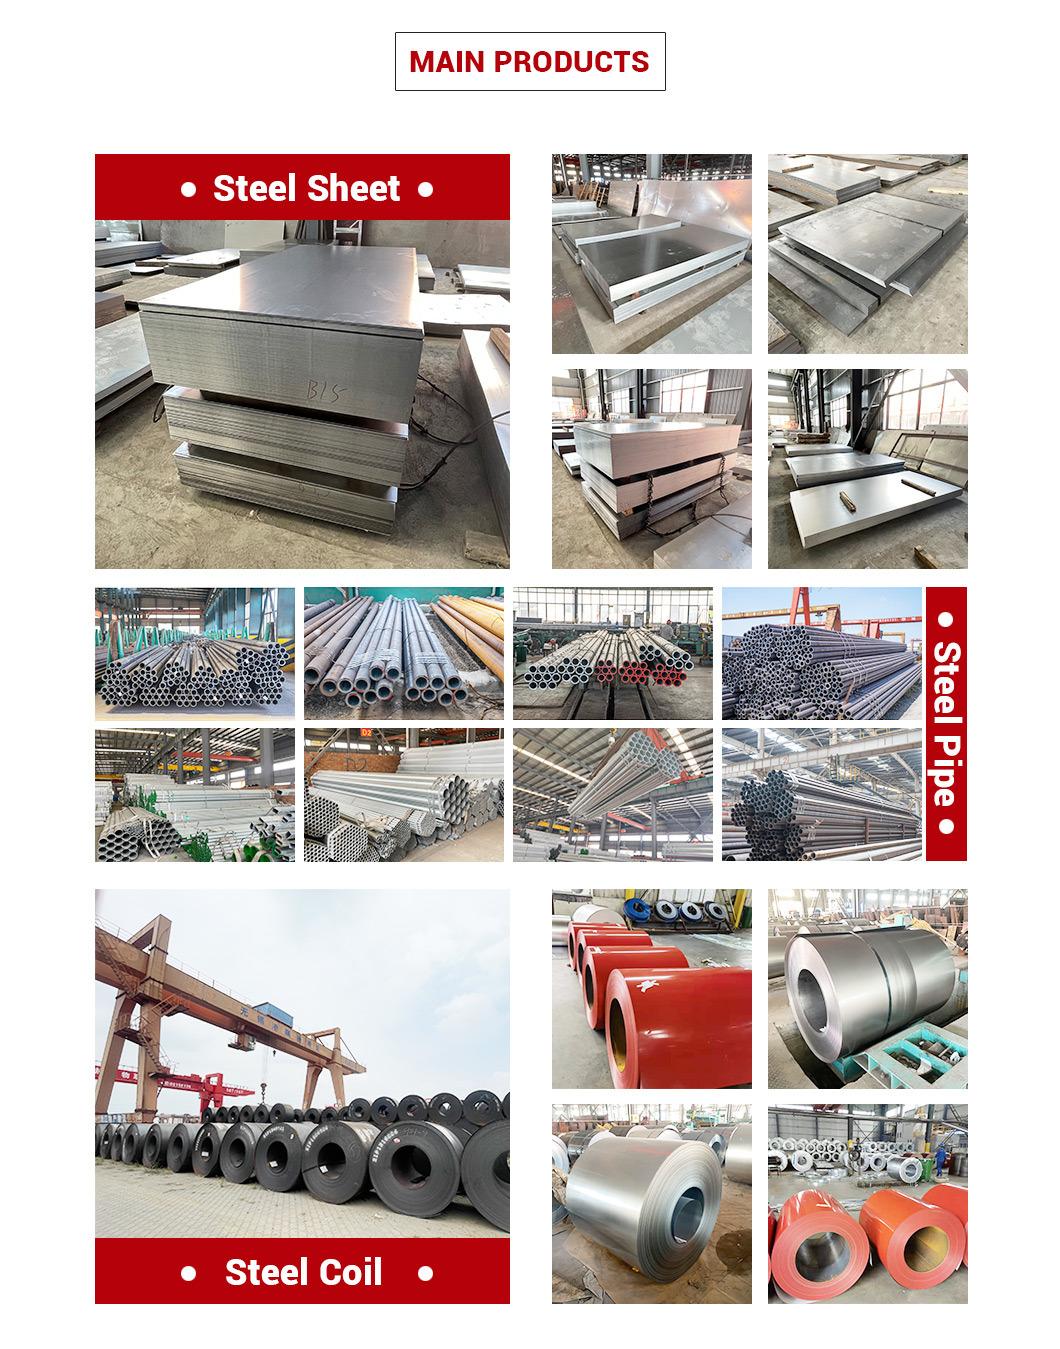 Standard Packing Welded, ERW, Cold Rolled. Hot Q195-Q345 Hot DIP Galvanized Coating